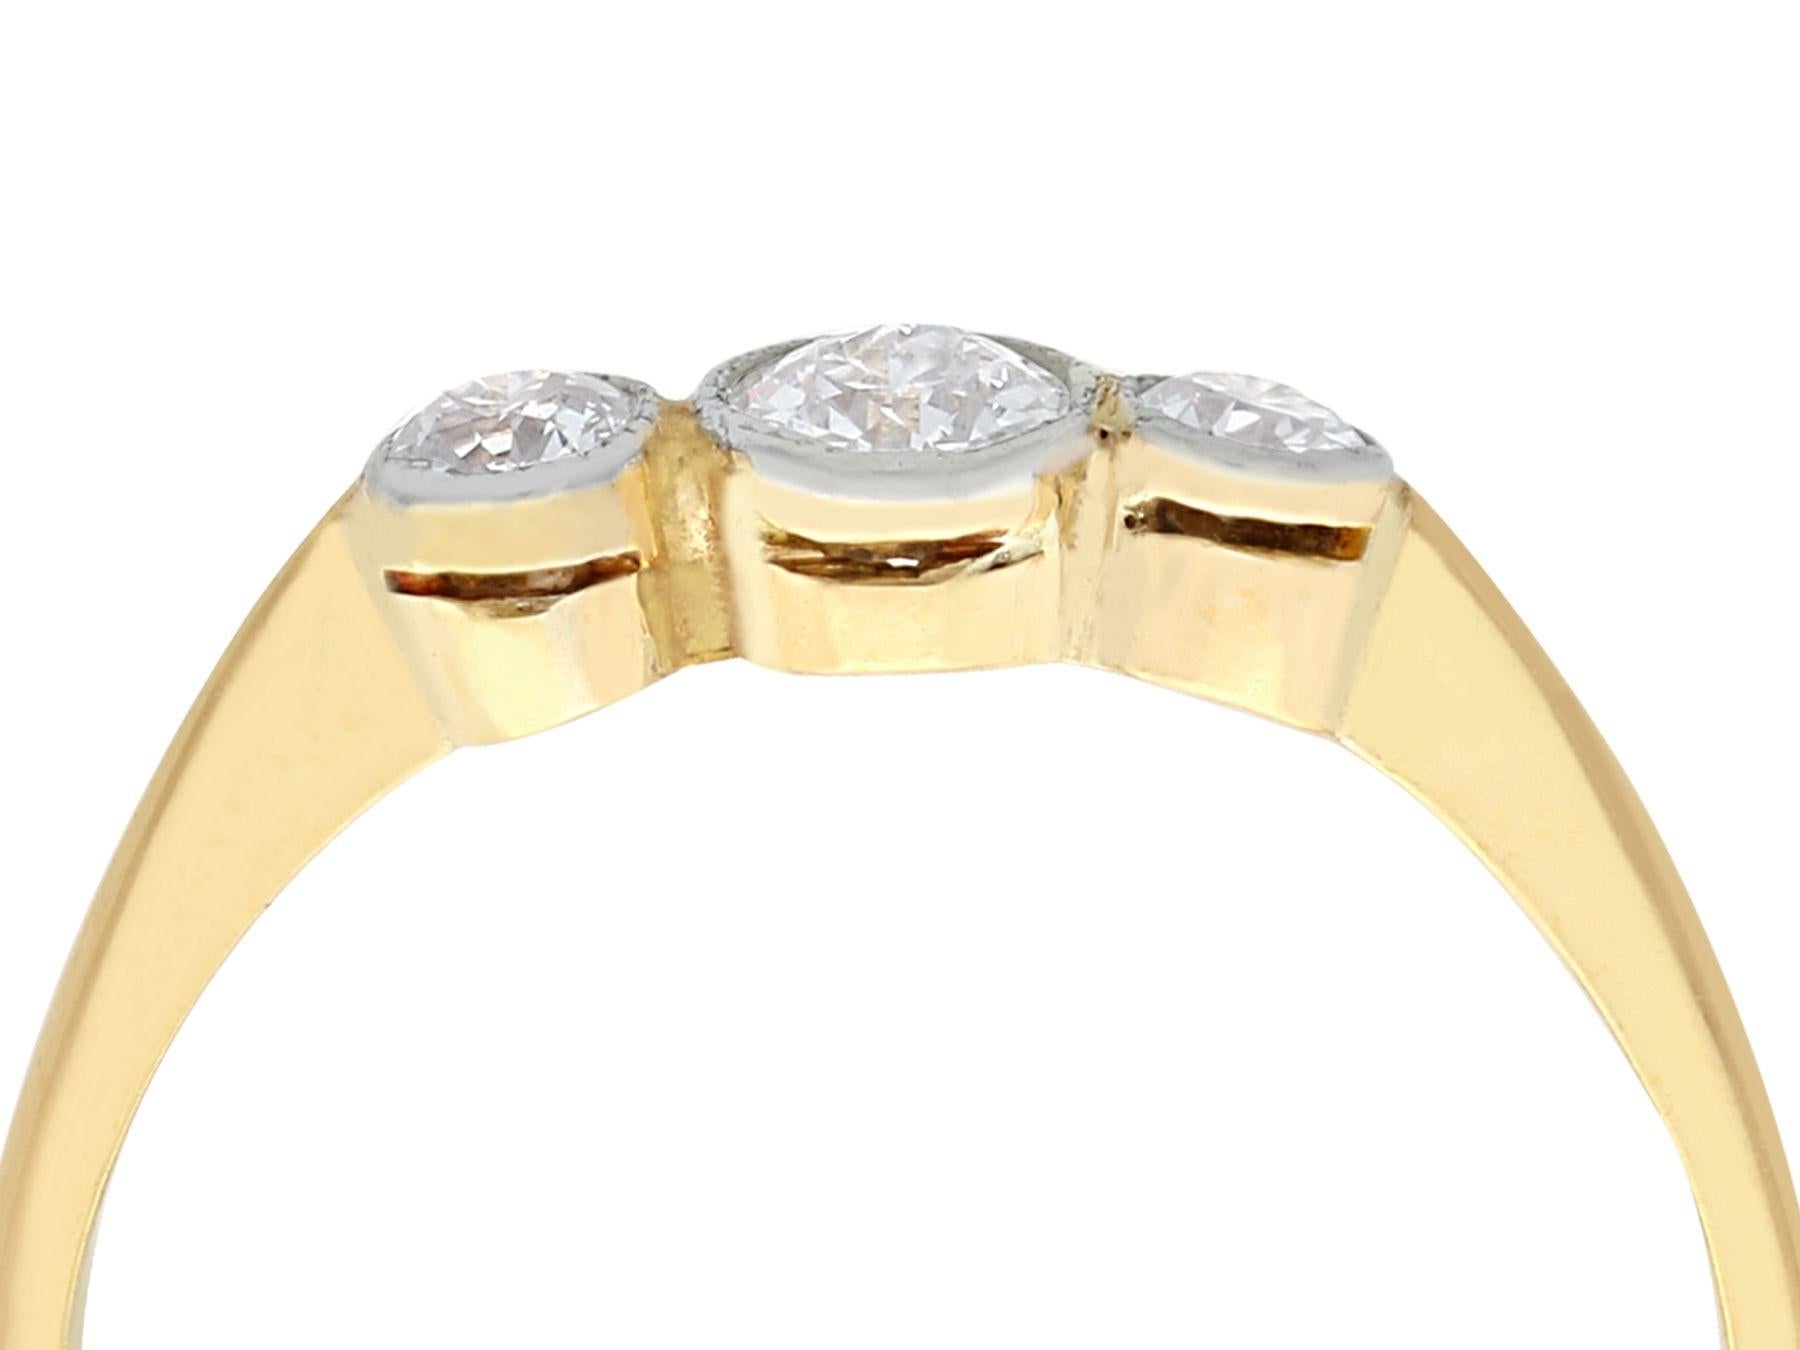 A fine and impressive antique 0.45 carat diamond (total) and 18 karat yellow gold, 18 karat white gold set three stone / trilogy ring; part of our diverse diamond jewelry and estate jewelry collections.

This fine and impressive trilogy ring has